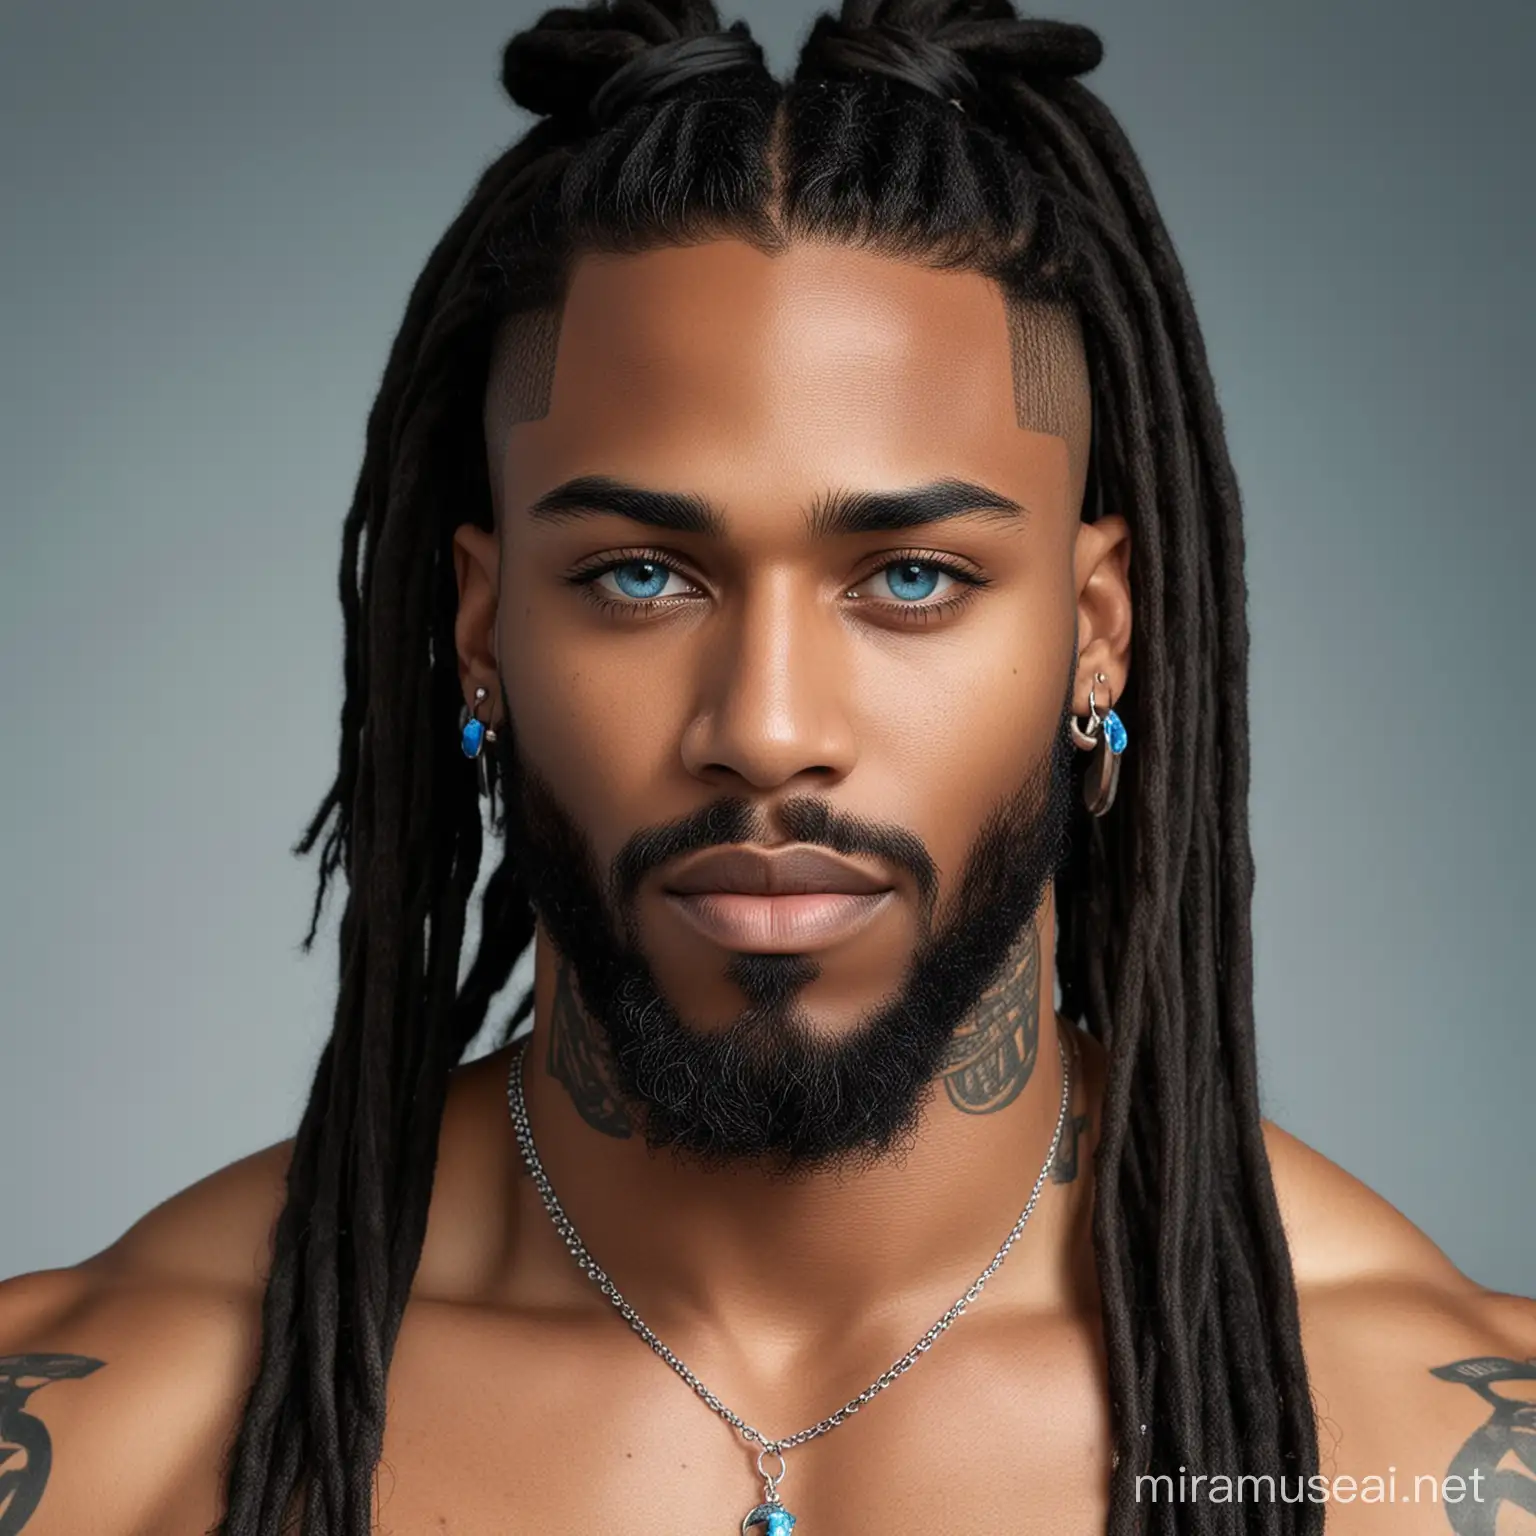 create image of Black man, long dreadlocks in a ponytail, cerulean blue eyes, almond shaped eyes, muscular, 6'2, 225 lbs, athletic build, 
stud nose piercing, full trimmed beard, tattoos on chest and arms, sapphires studs earrings

